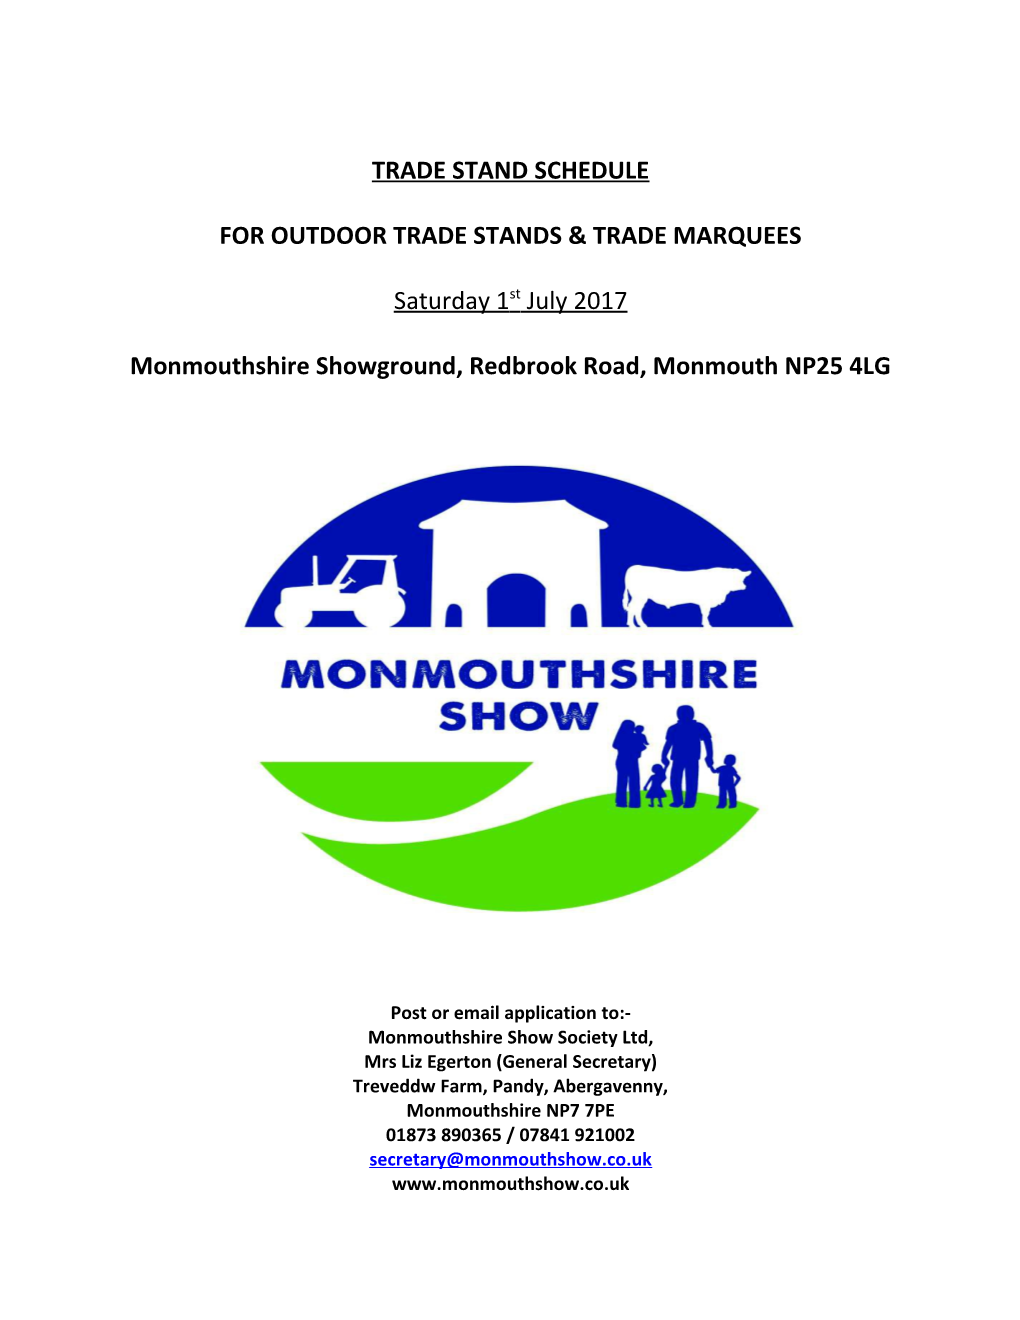 Monmouthshire Showground, Redbrook Road, Monmouth NP25 4LG